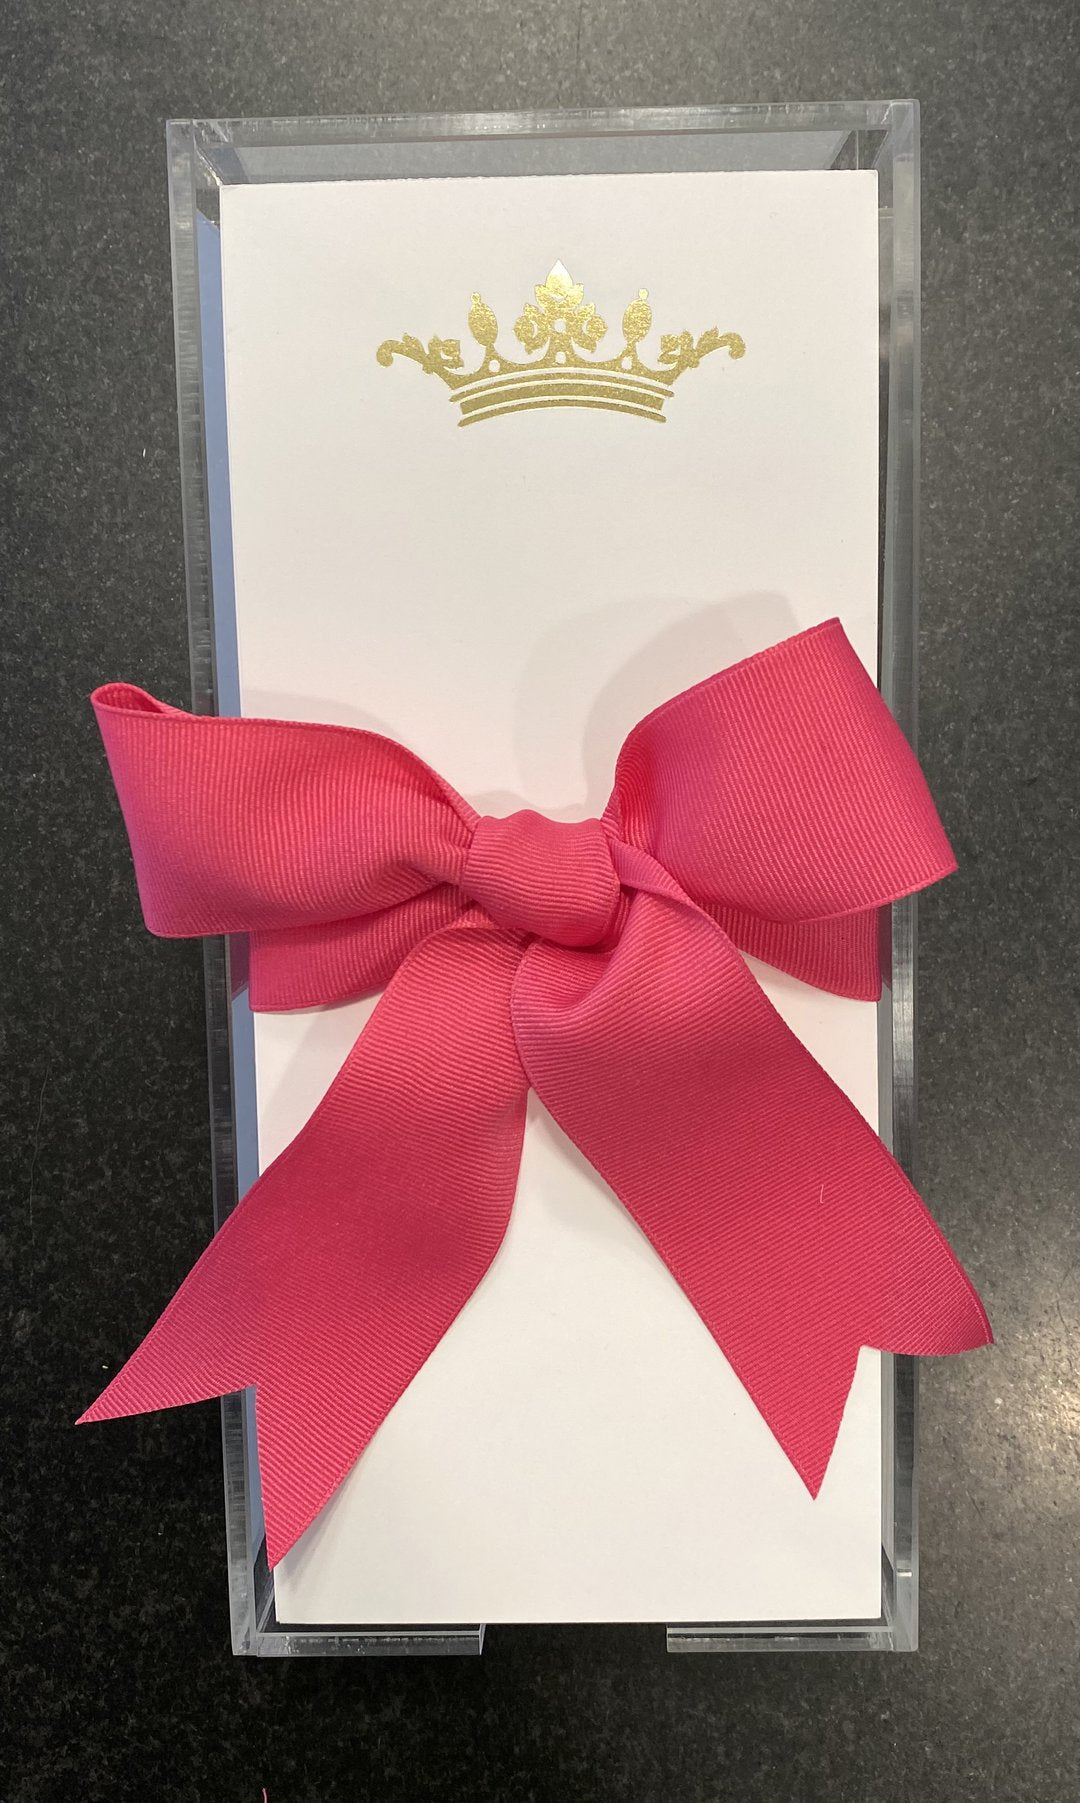 A photo of the Gold Embossed Crown note pad with a pink bow.